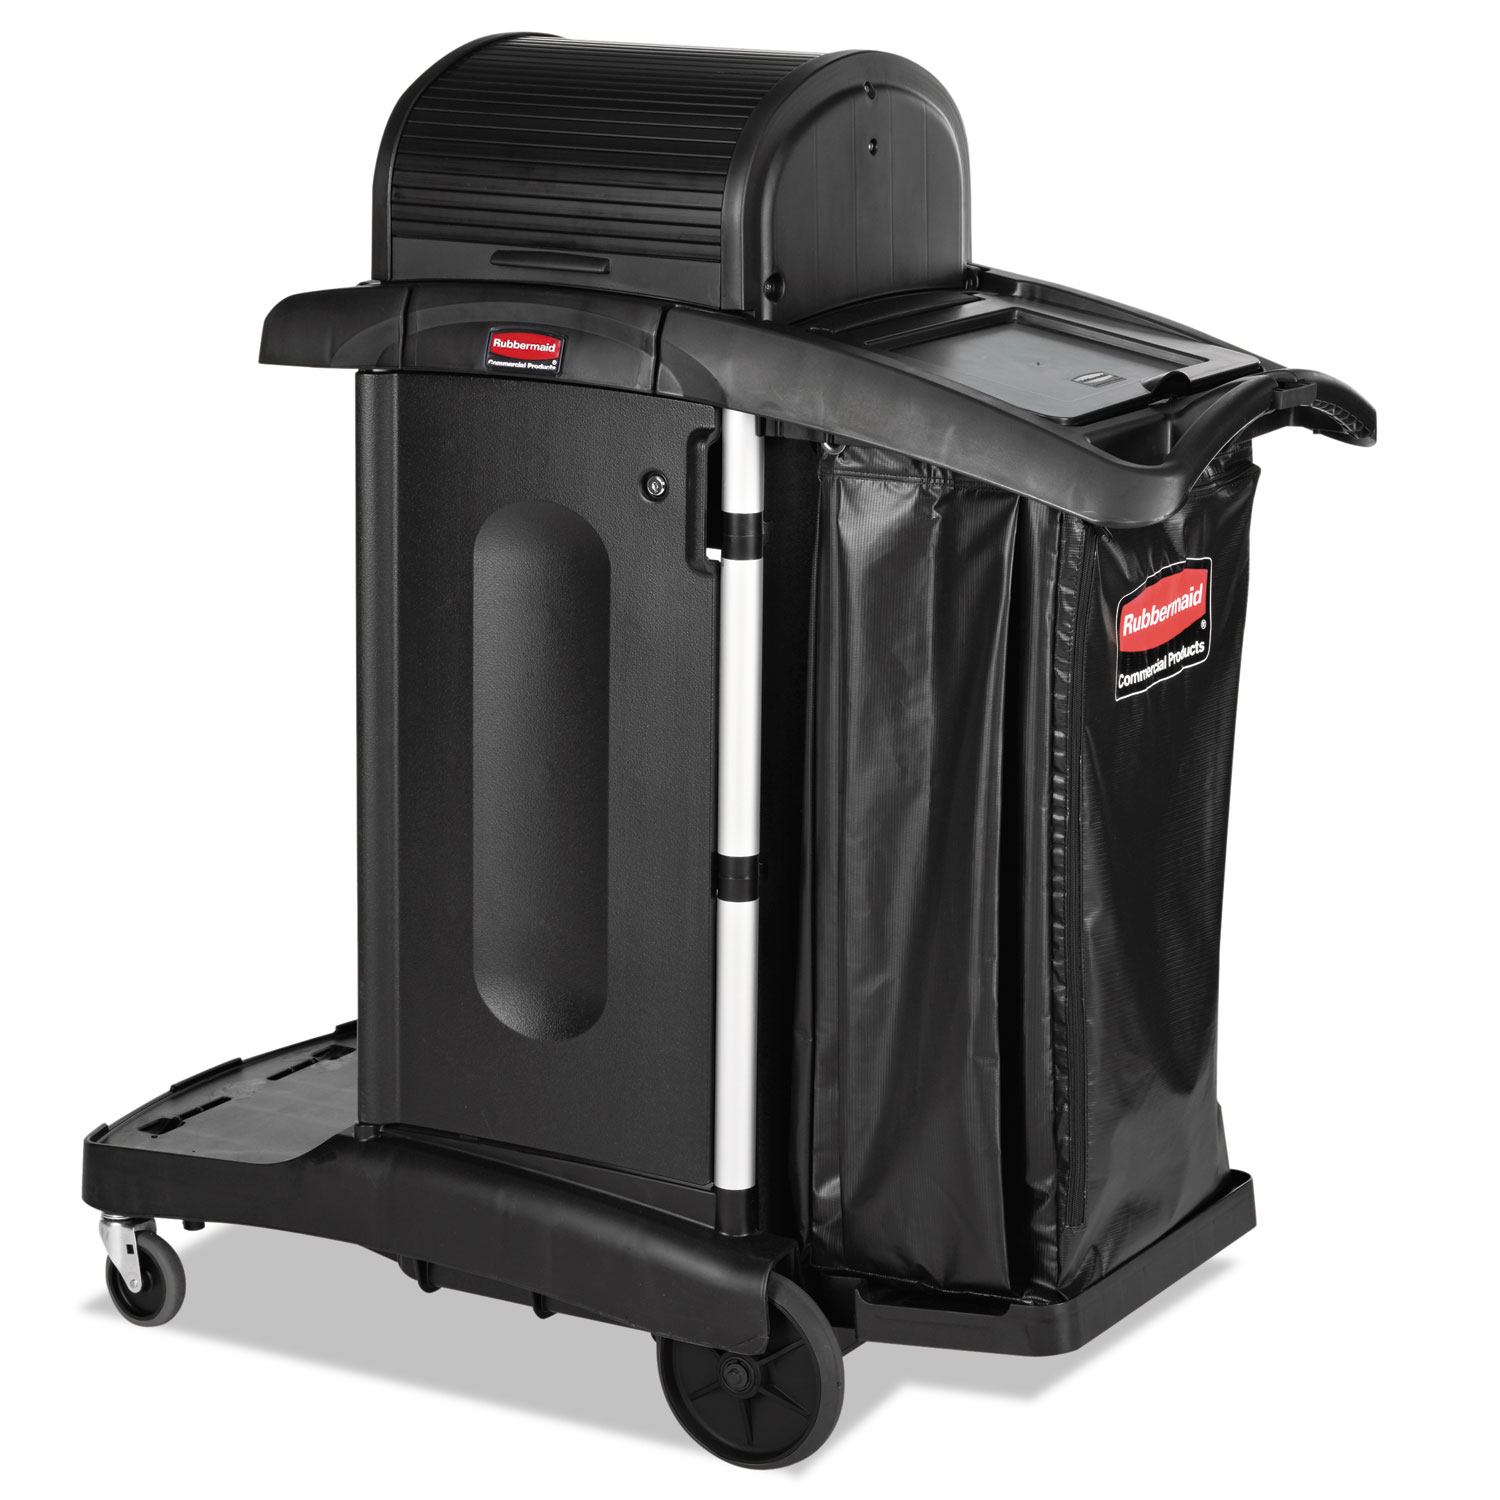  Rubbermaid Commercial 1861427 Executive High Security Janitorial Cleaning Cart, 23.1w x 39.6d x 27.5h, Black (RCP1861427) 